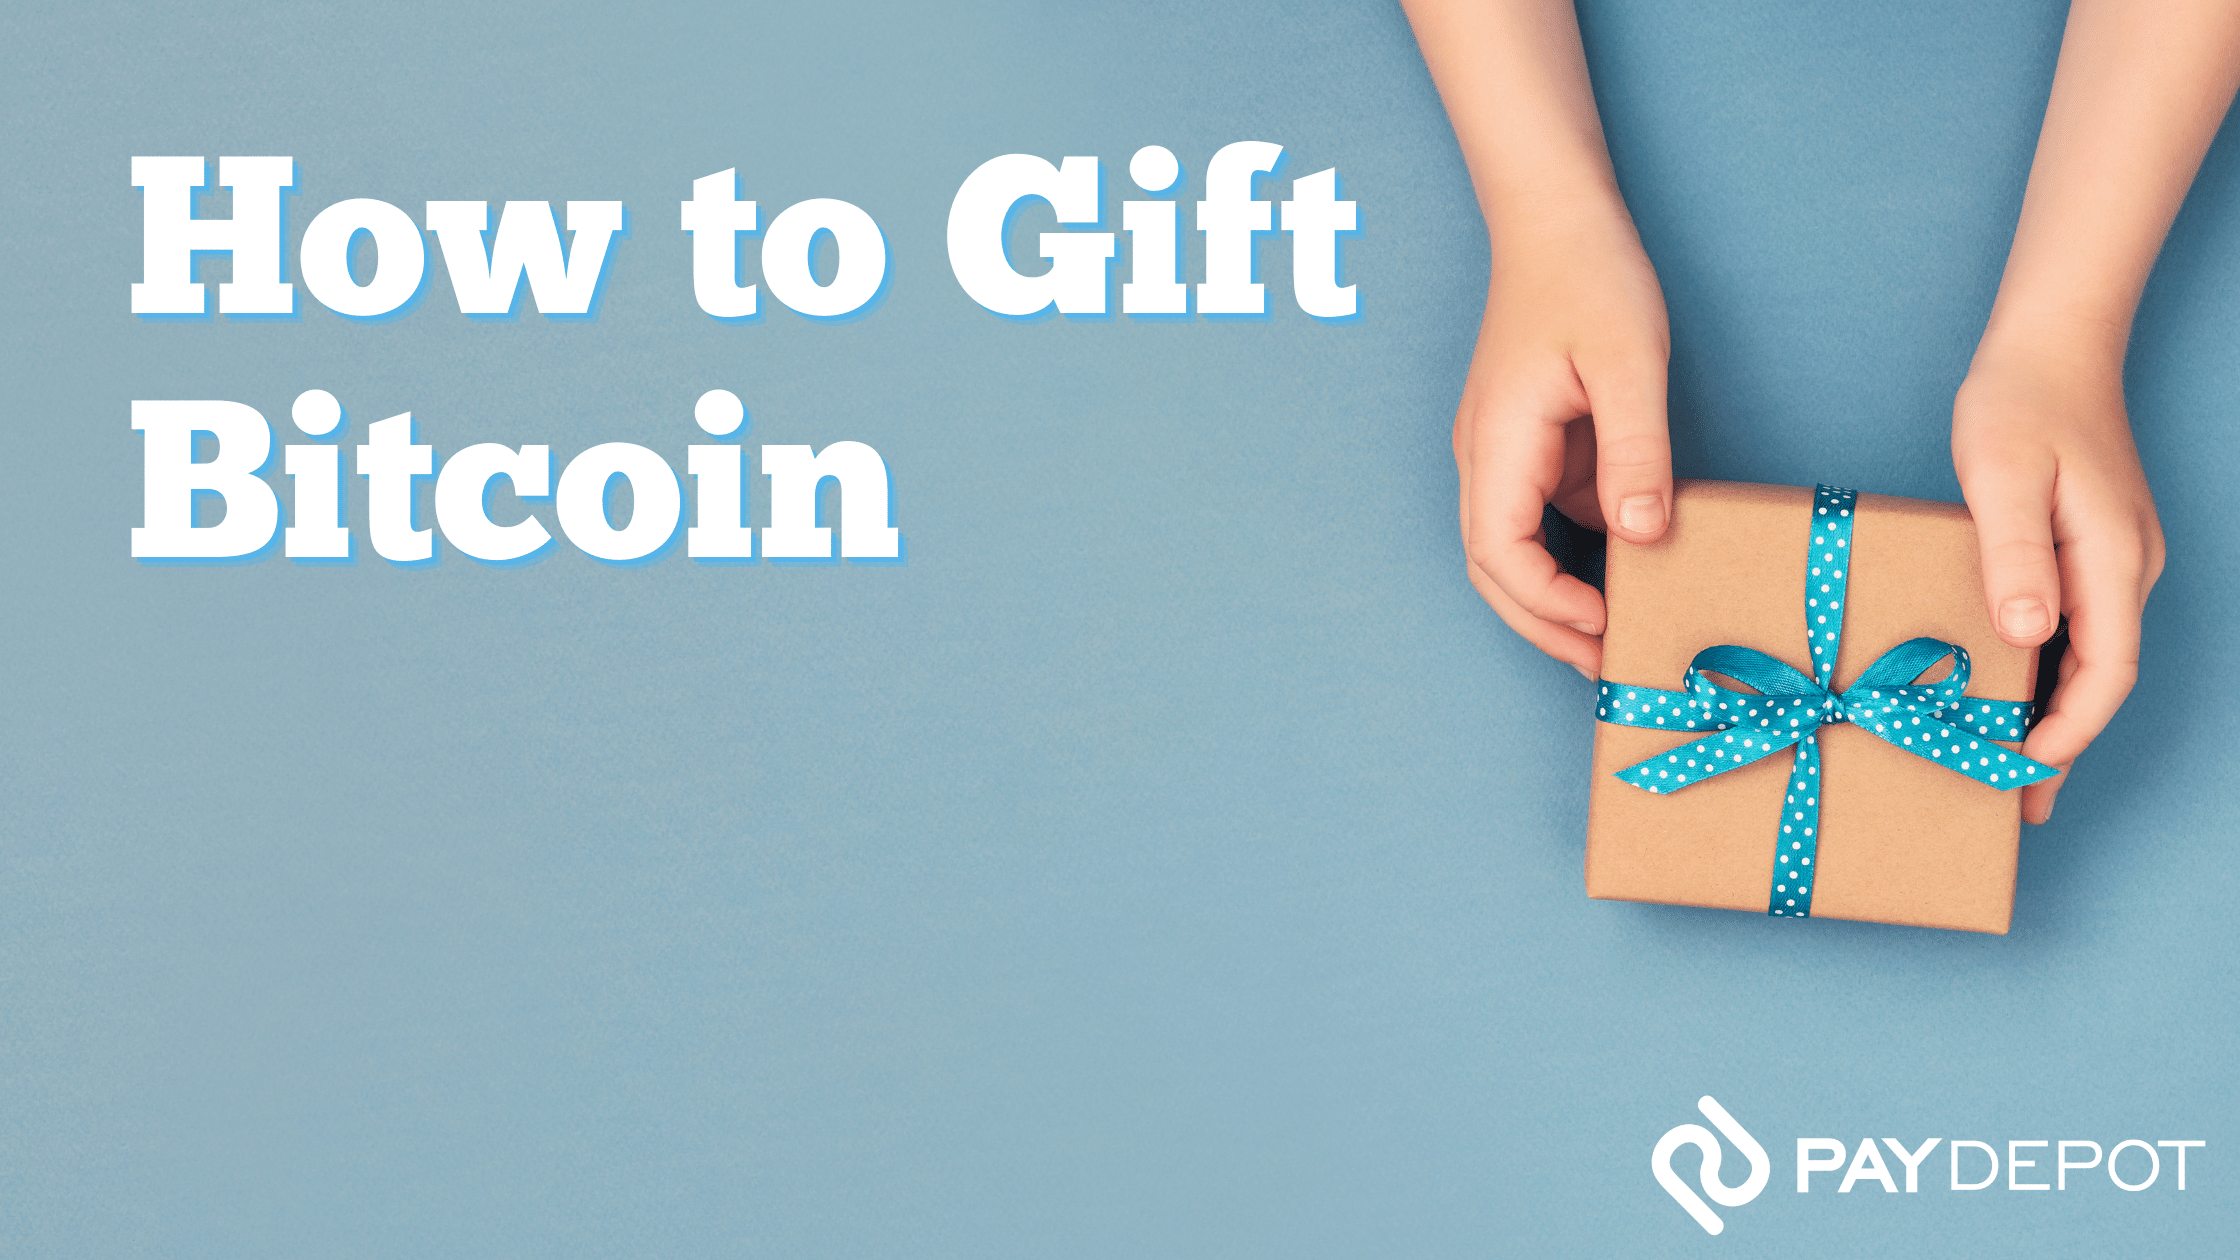 How To Gift Bitcoin